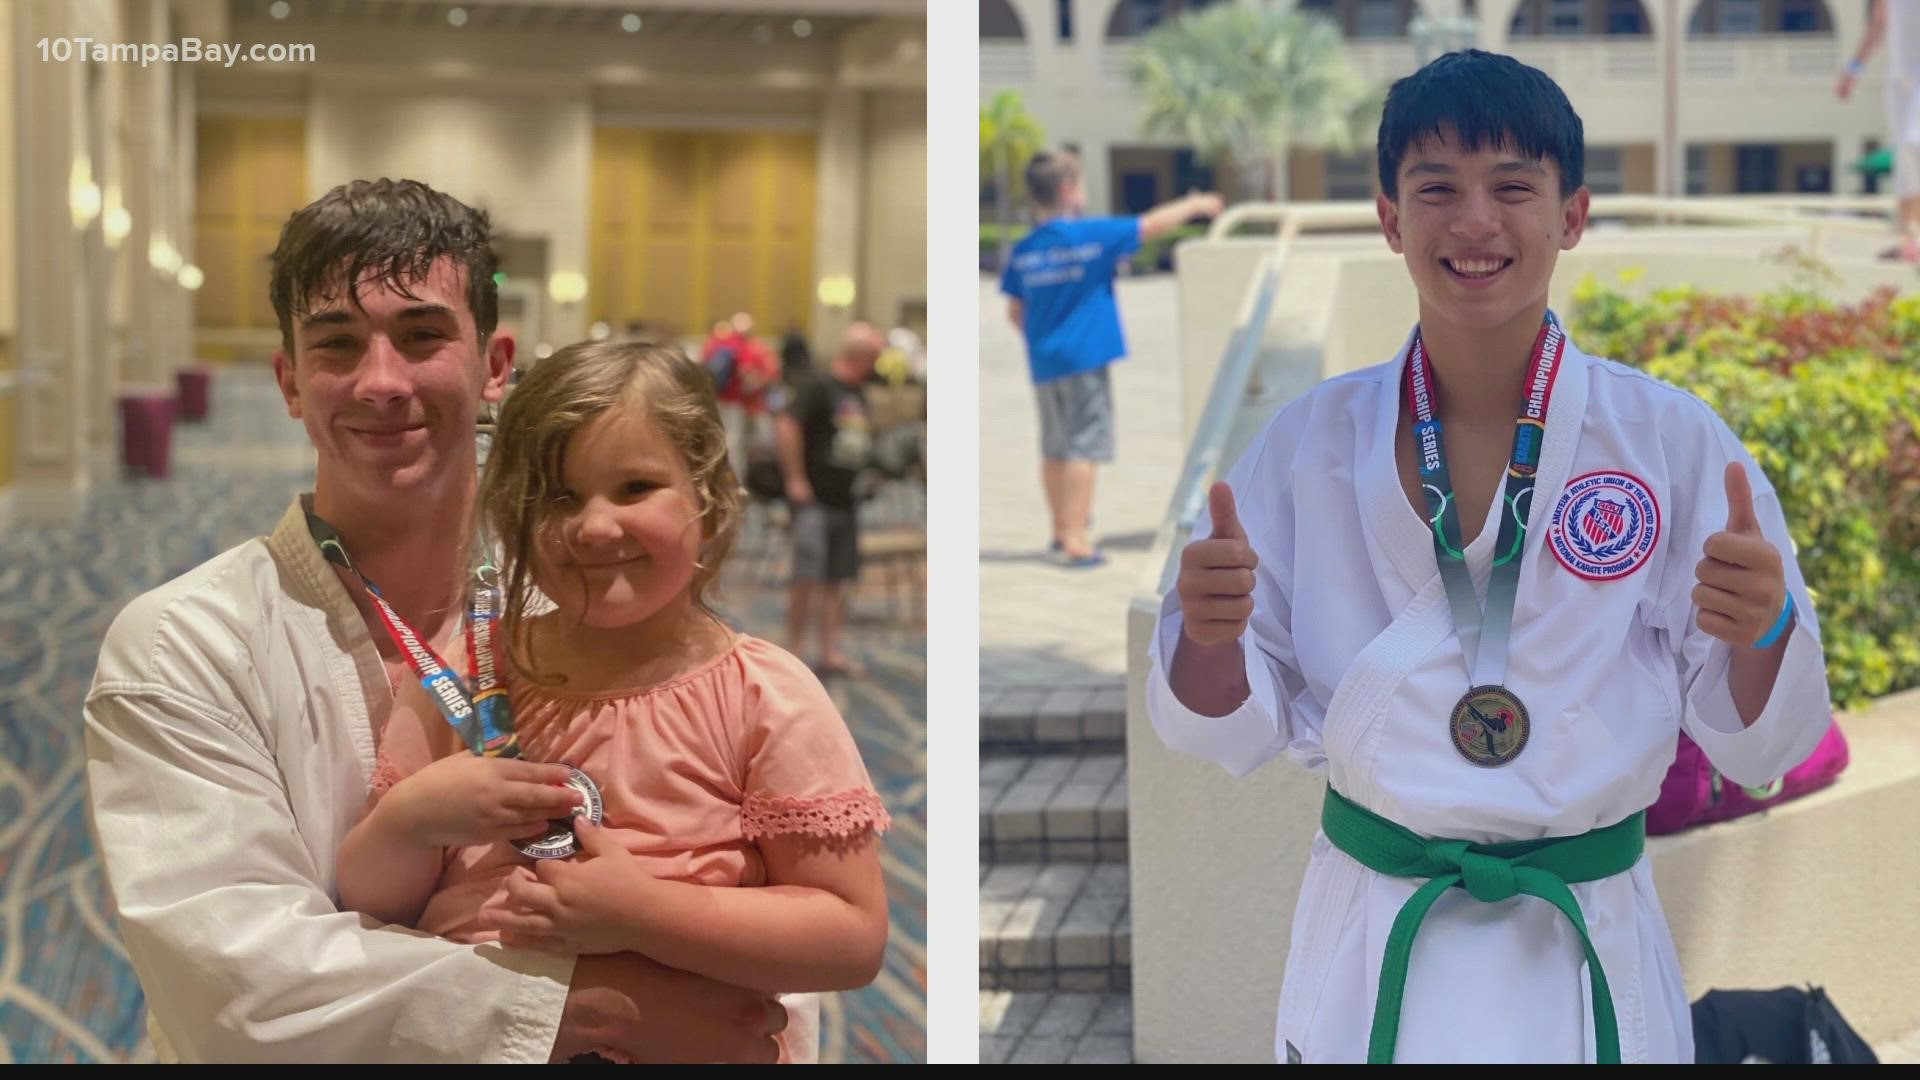 With the eyes of the world on competition in Tokyo, some youth athletes from Florida will compete on an international stage of their own this weekend in Texas.